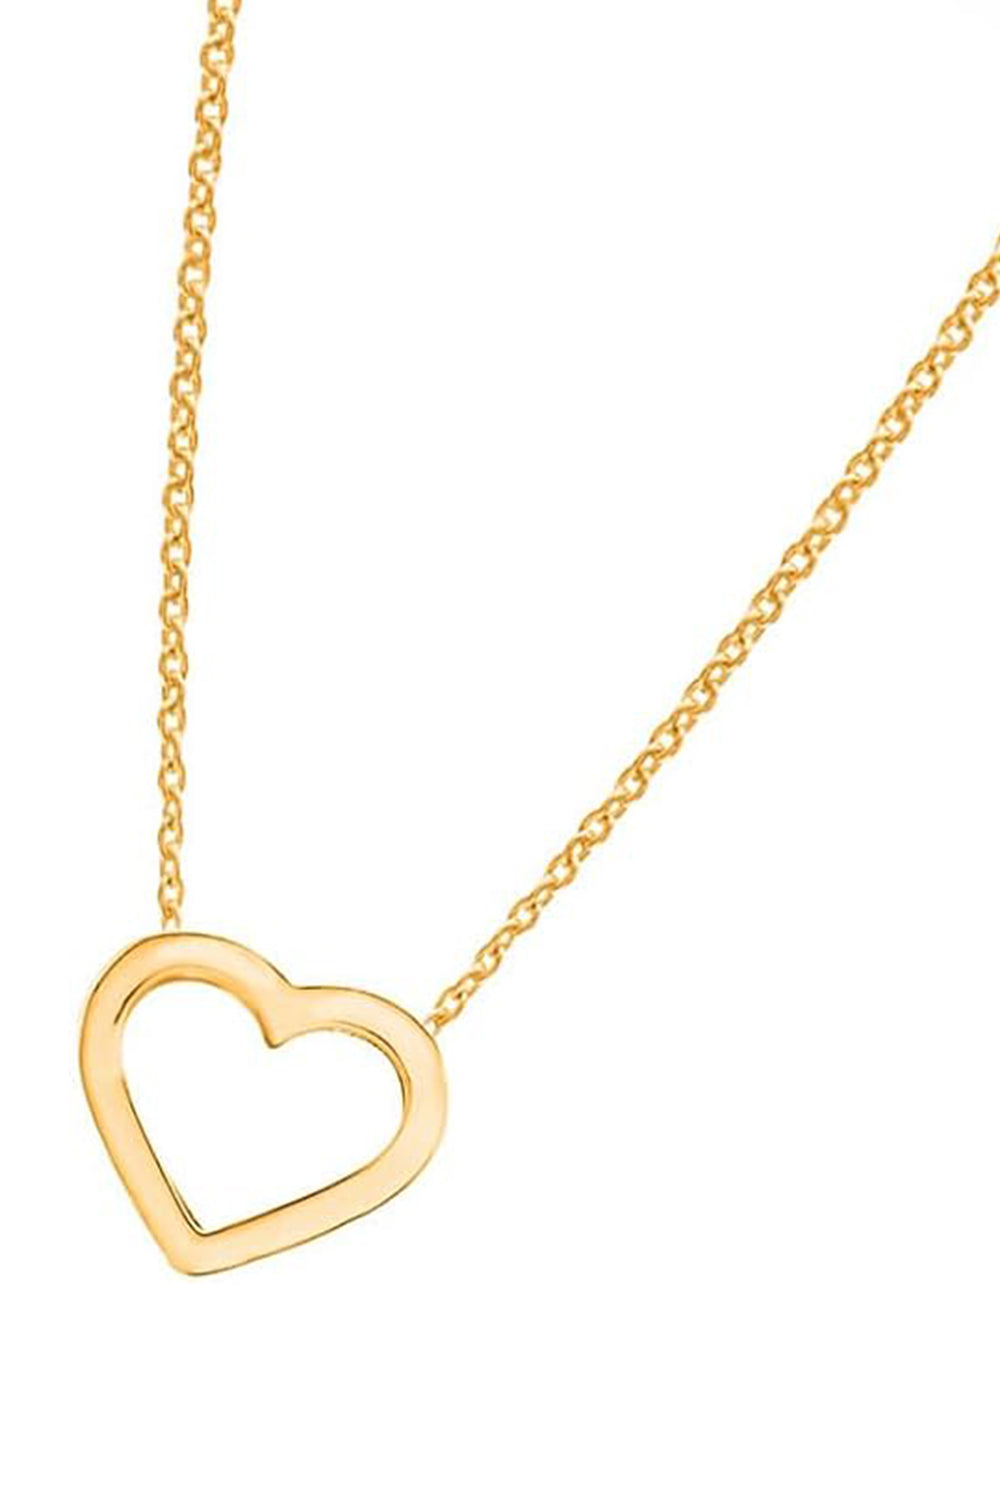 Yellow Gold Color Open Heart Pendant Necklace